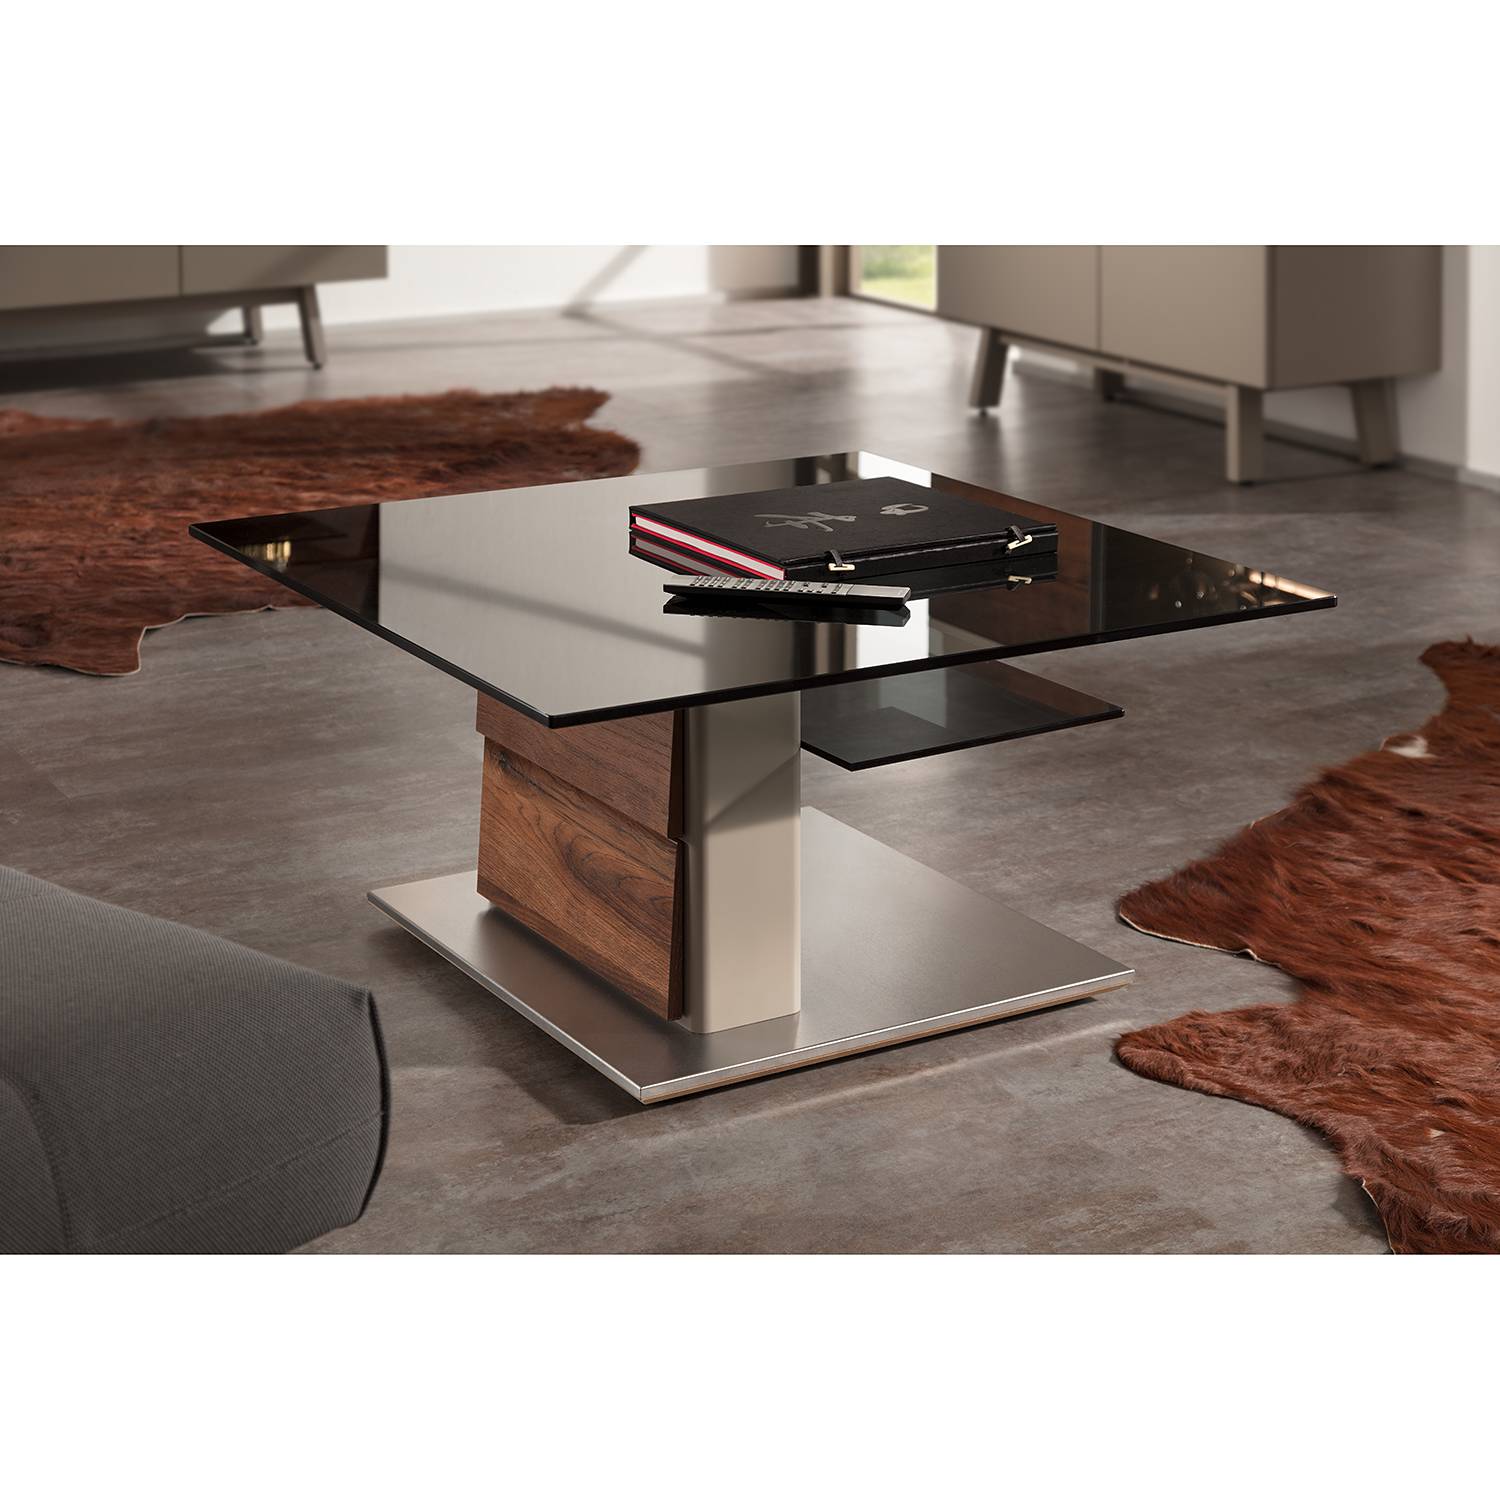 Image of Table basse Misano 000000001000188640